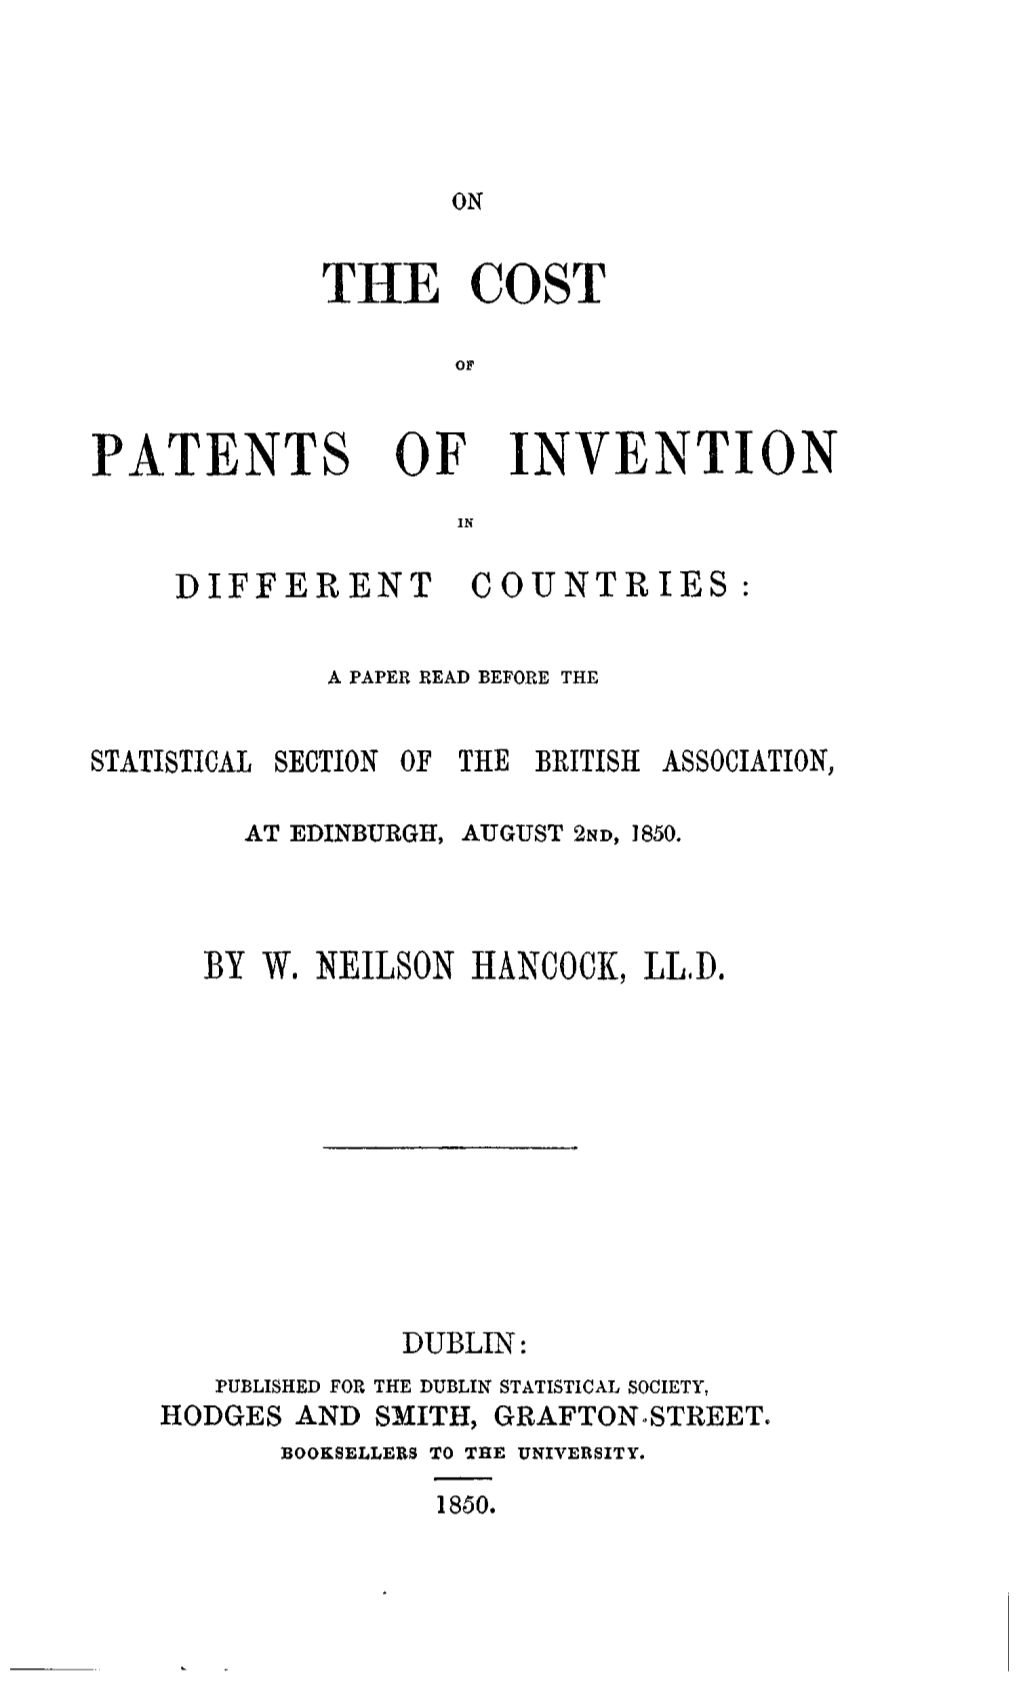 The Cost Patents of Invention